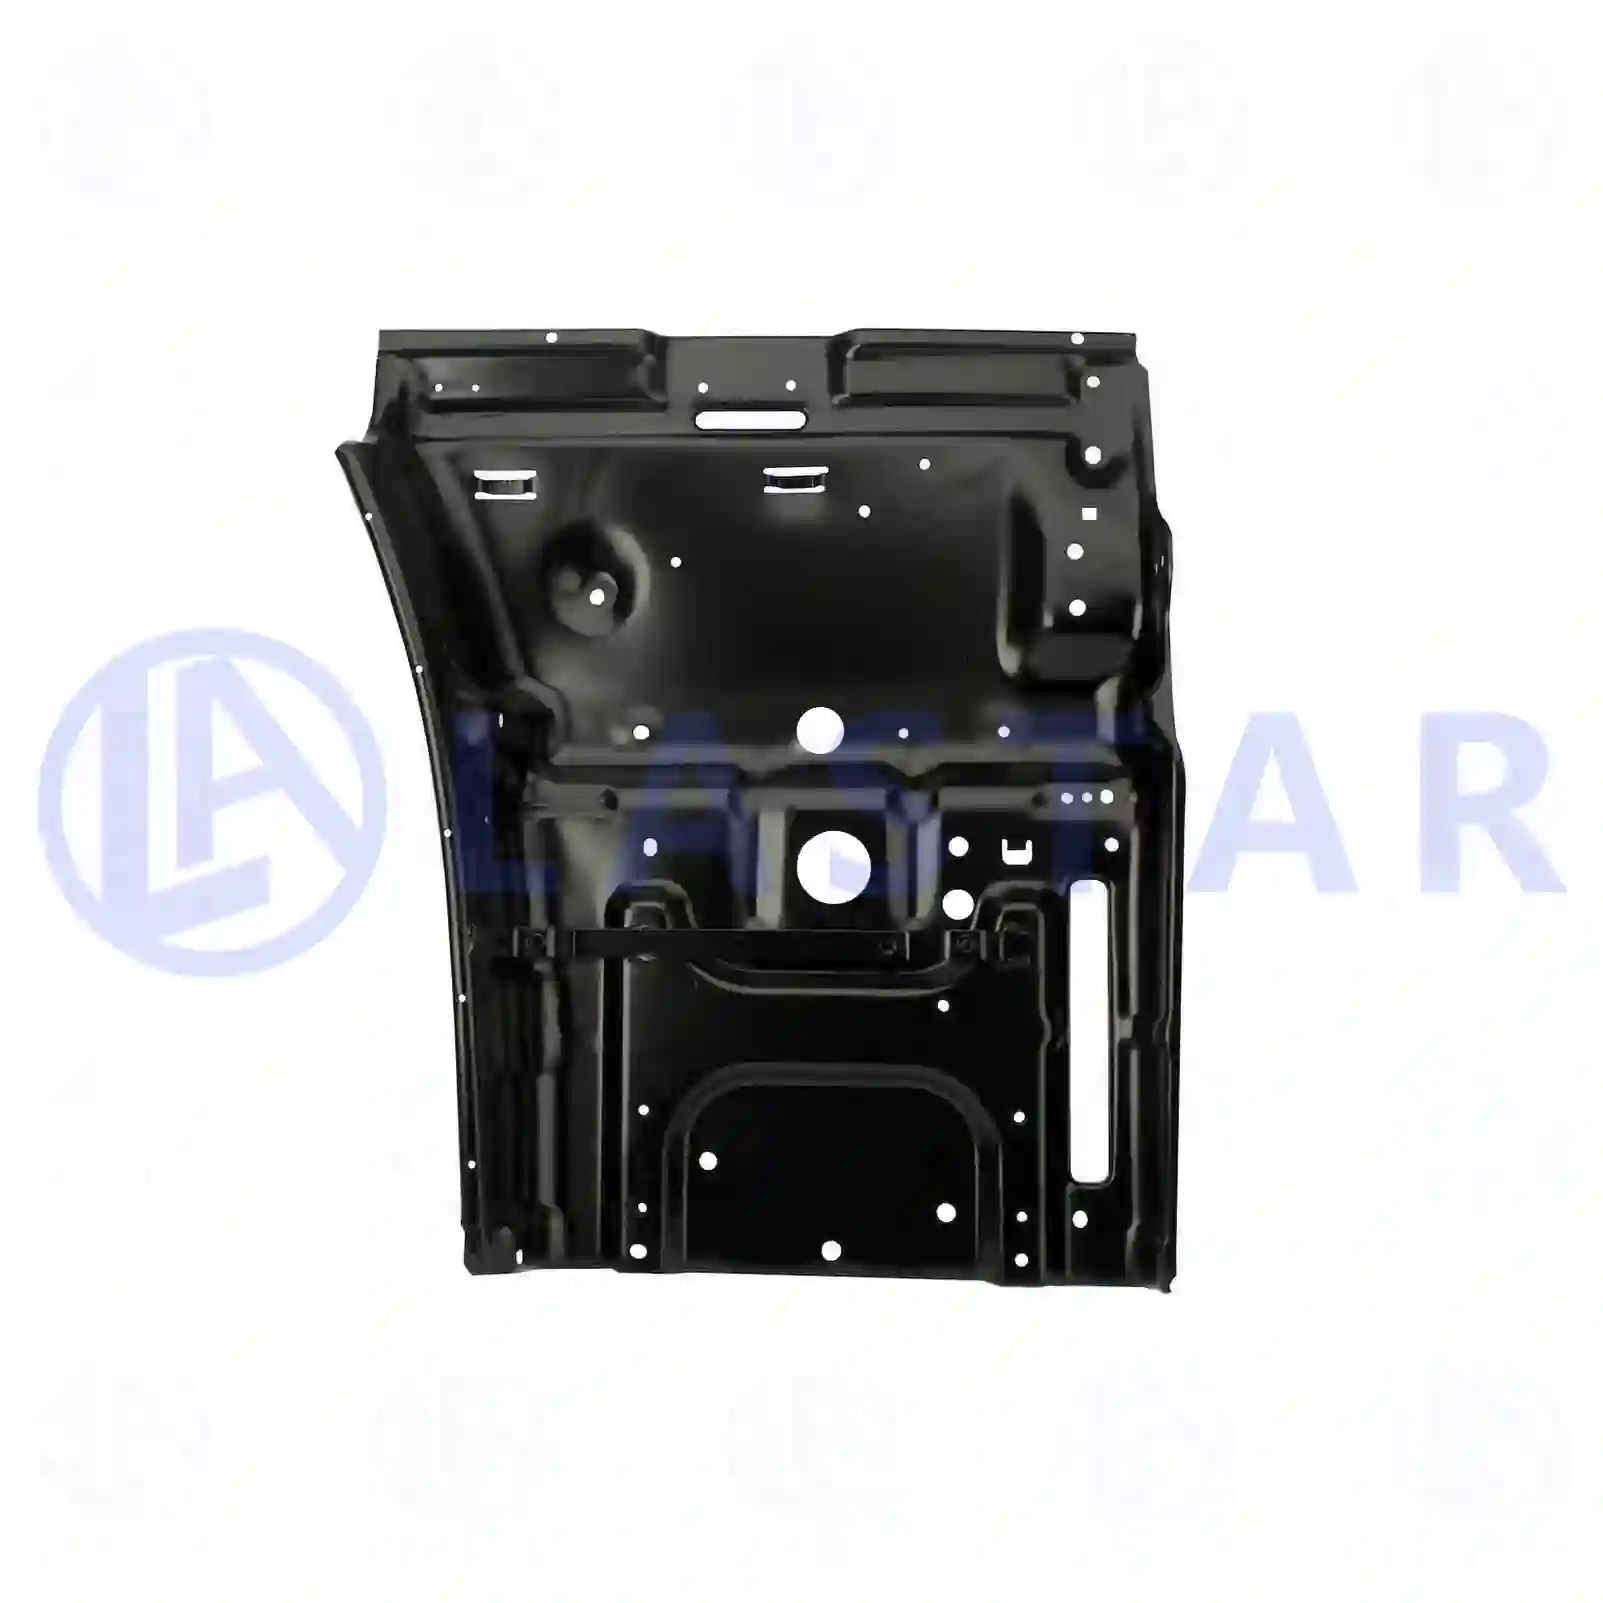 Step well case, right, 77719729, 1351194, 1515194, 515194, ZG61209-0008 ||  77719729 Lastar Spare Part | Truck Spare Parts, Auotomotive Spare Parts Step well case, right, 77719729, 1351194, 1515194, 515194, ZG61209-0008 ||  77719729 Lastar Spare Part | Truck Spare Parts, Auotomotive Spare Parts